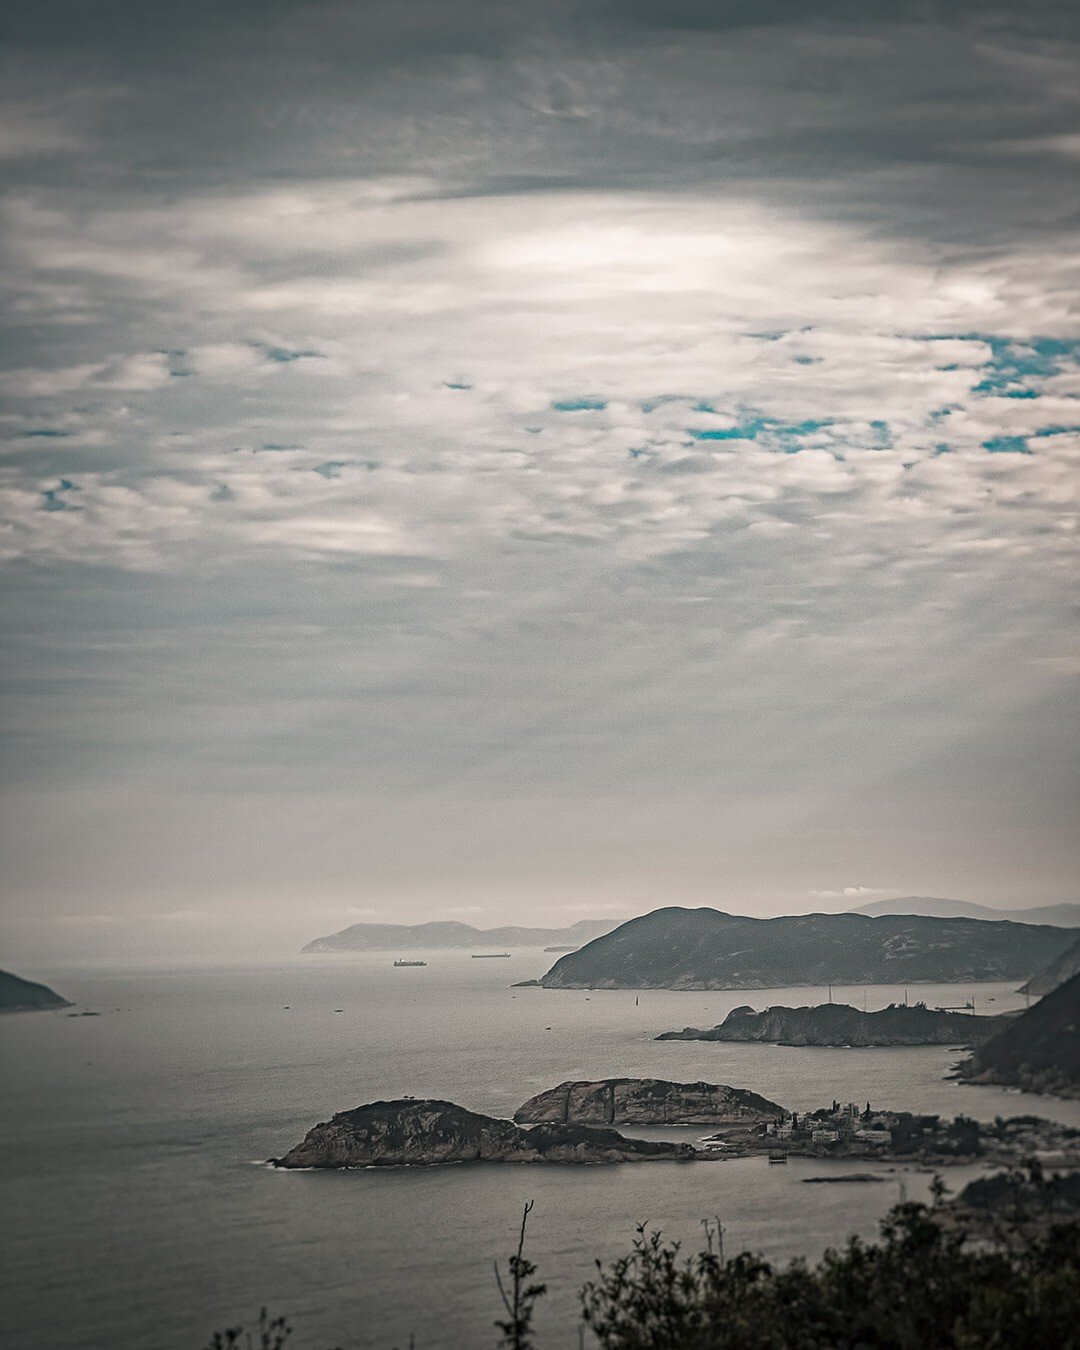 \\ HONG KONG SERIES
&ldquo;Enchanted islands are hard to understand,' he said. 'I've always thought that. It worried me even as a child. The trouble is that you can never be sure where the enchantment begins and where it ends.&rdquo; ― Robert Aickman